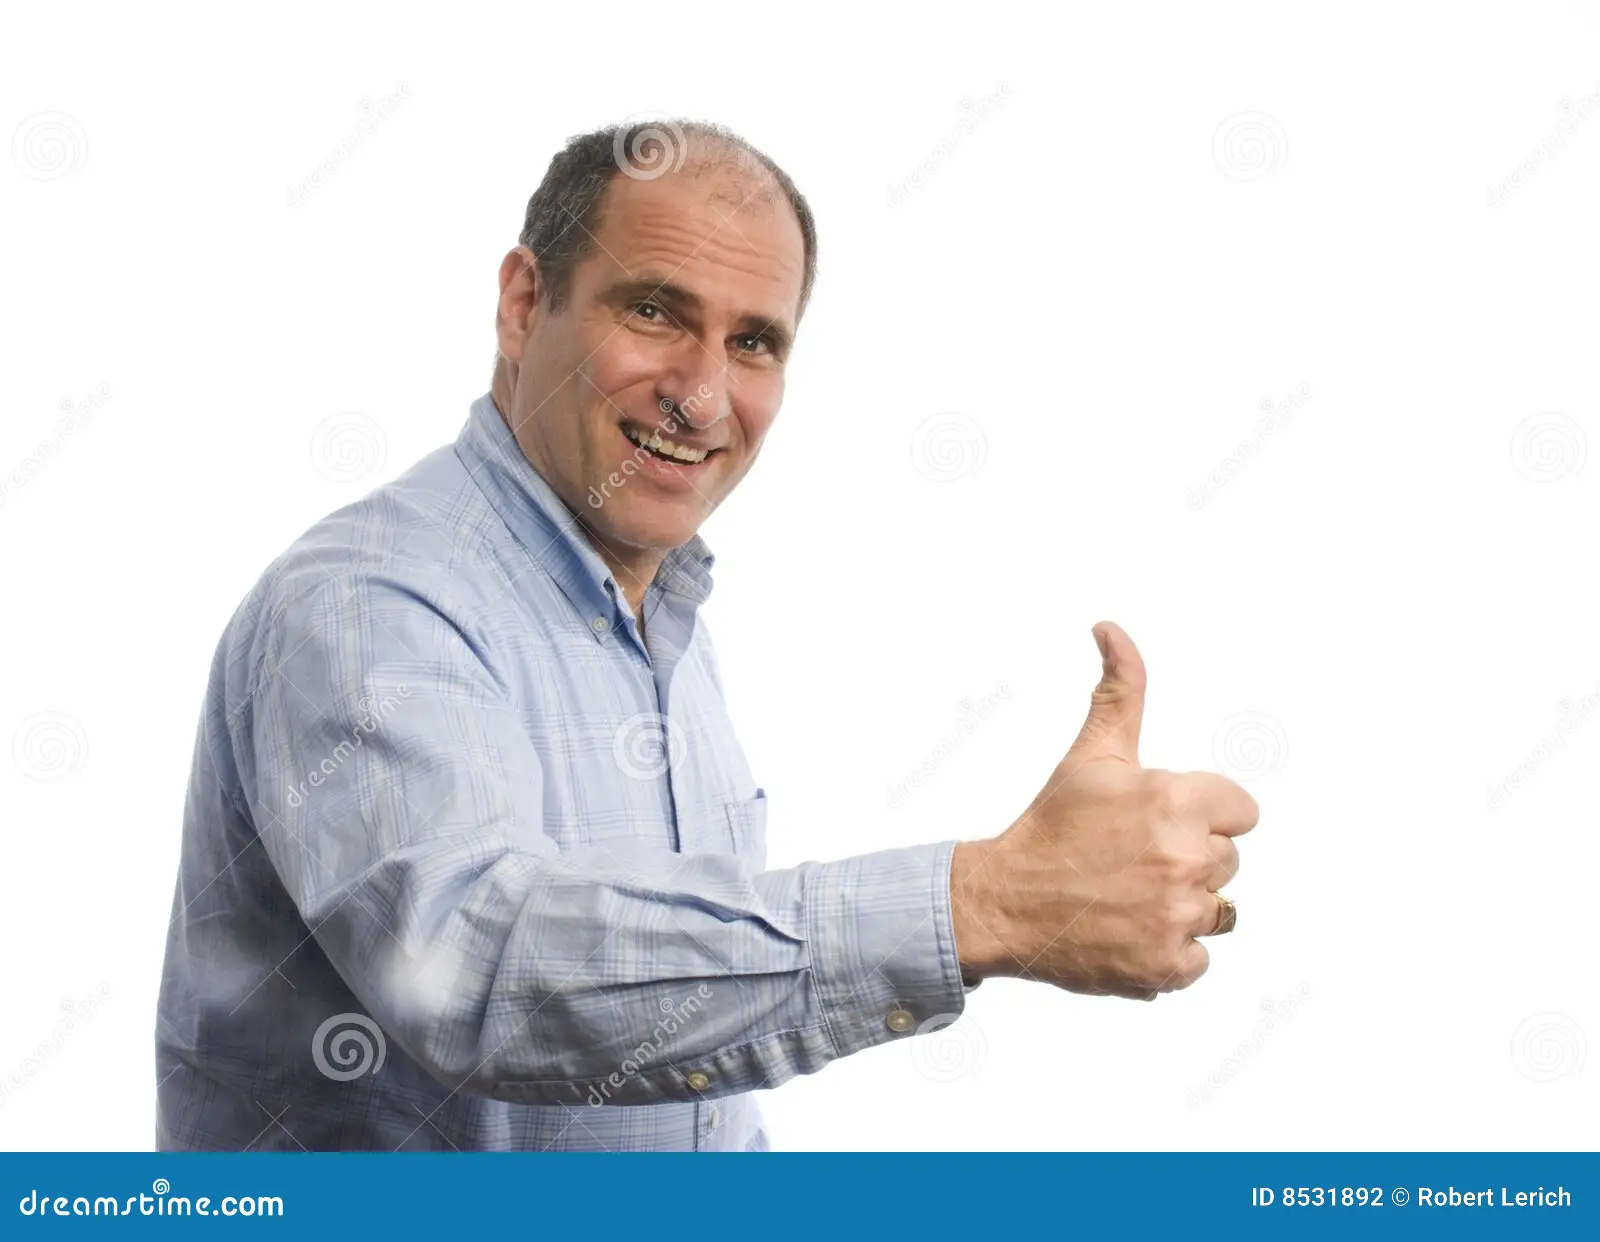 Man doing a thumbs up